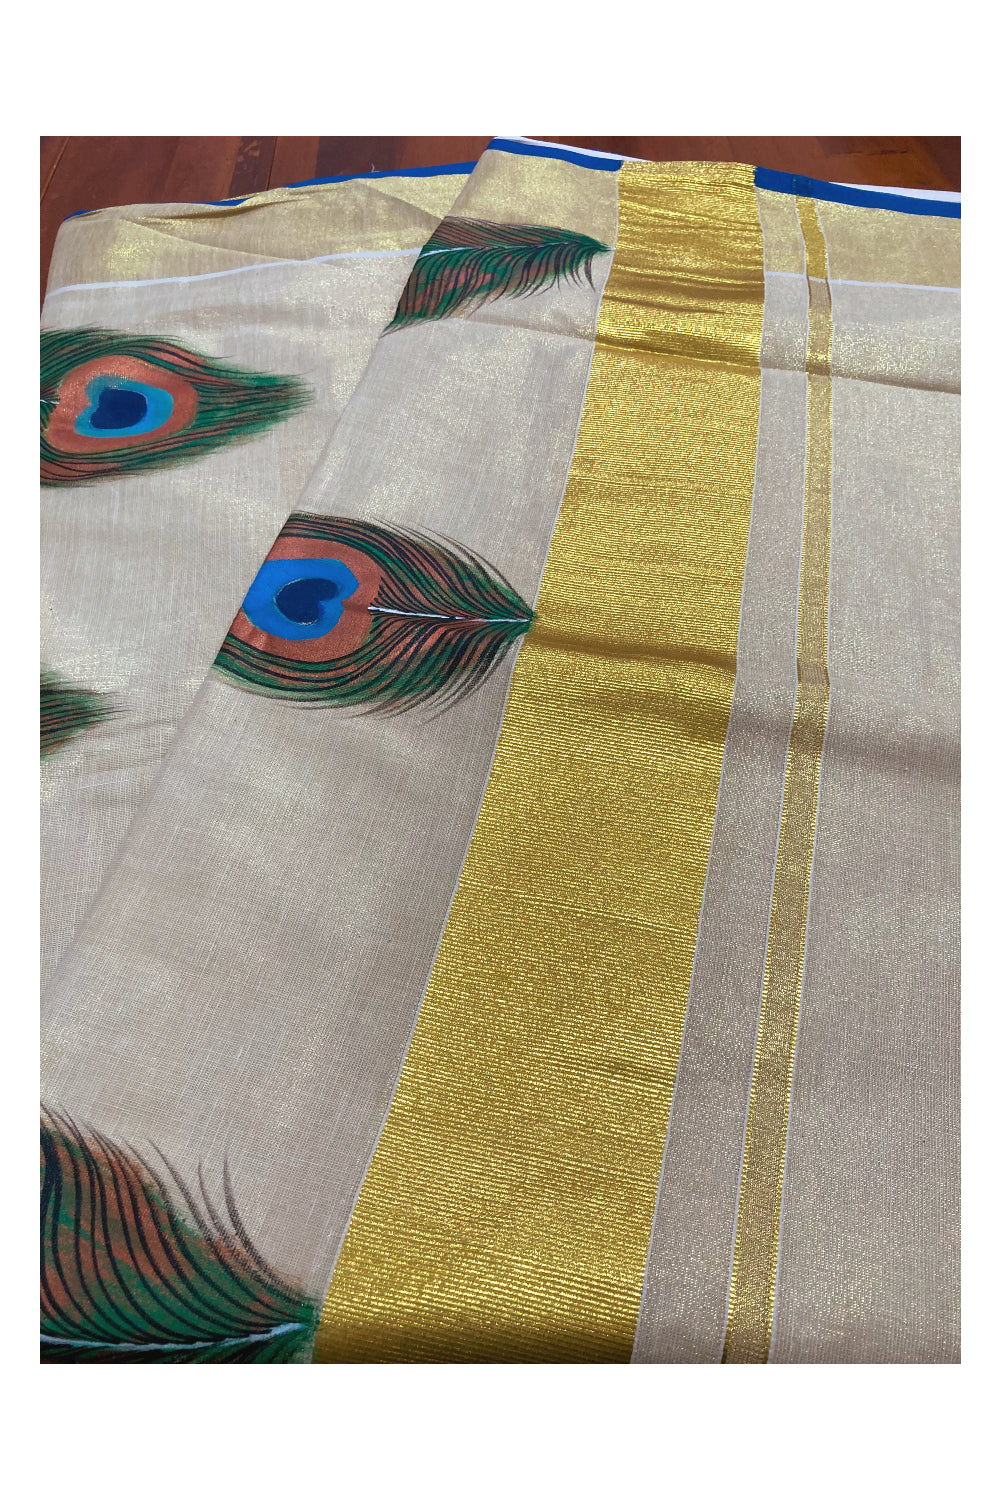 Kerala Tissue Kasavu Saree with Hand Painted Feather Design and Blue on Border